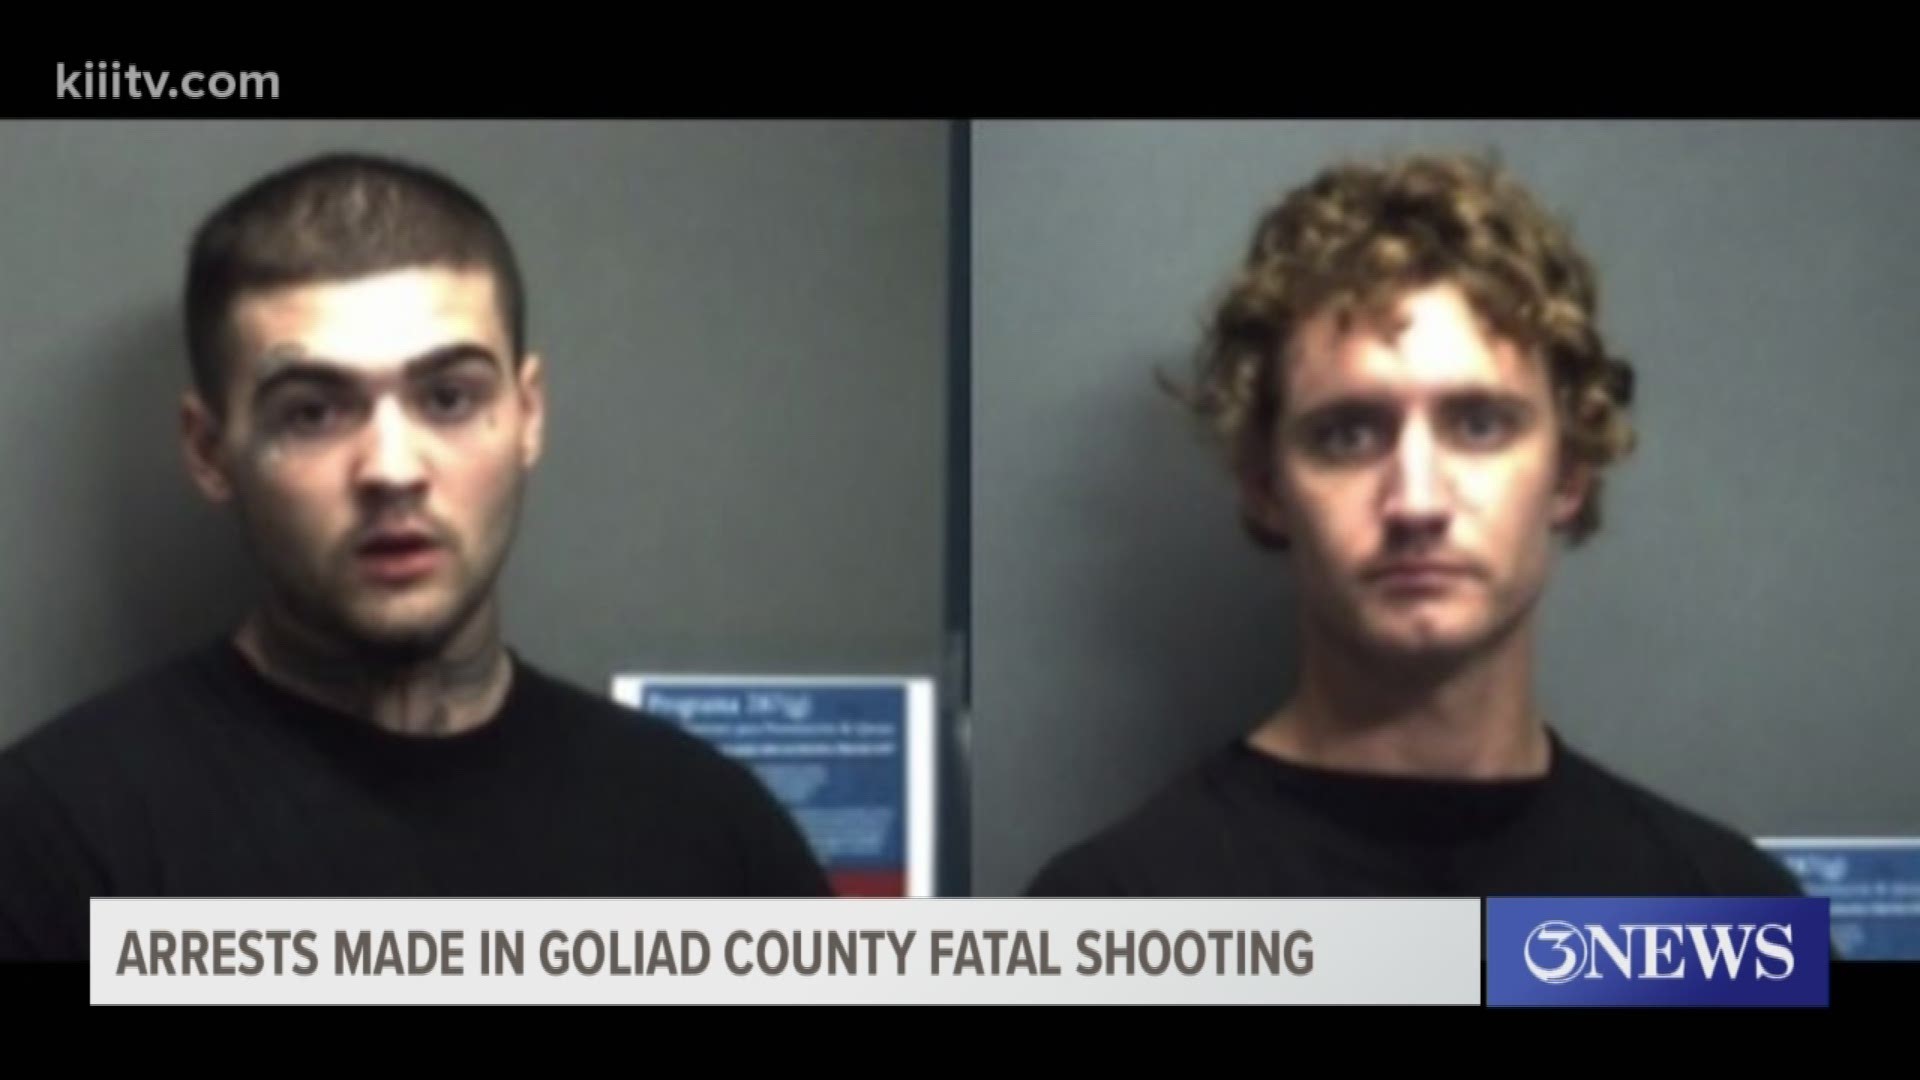 The duo reportedly started their crime spree in Victoria county before fatally shooting a 62-year-old woman